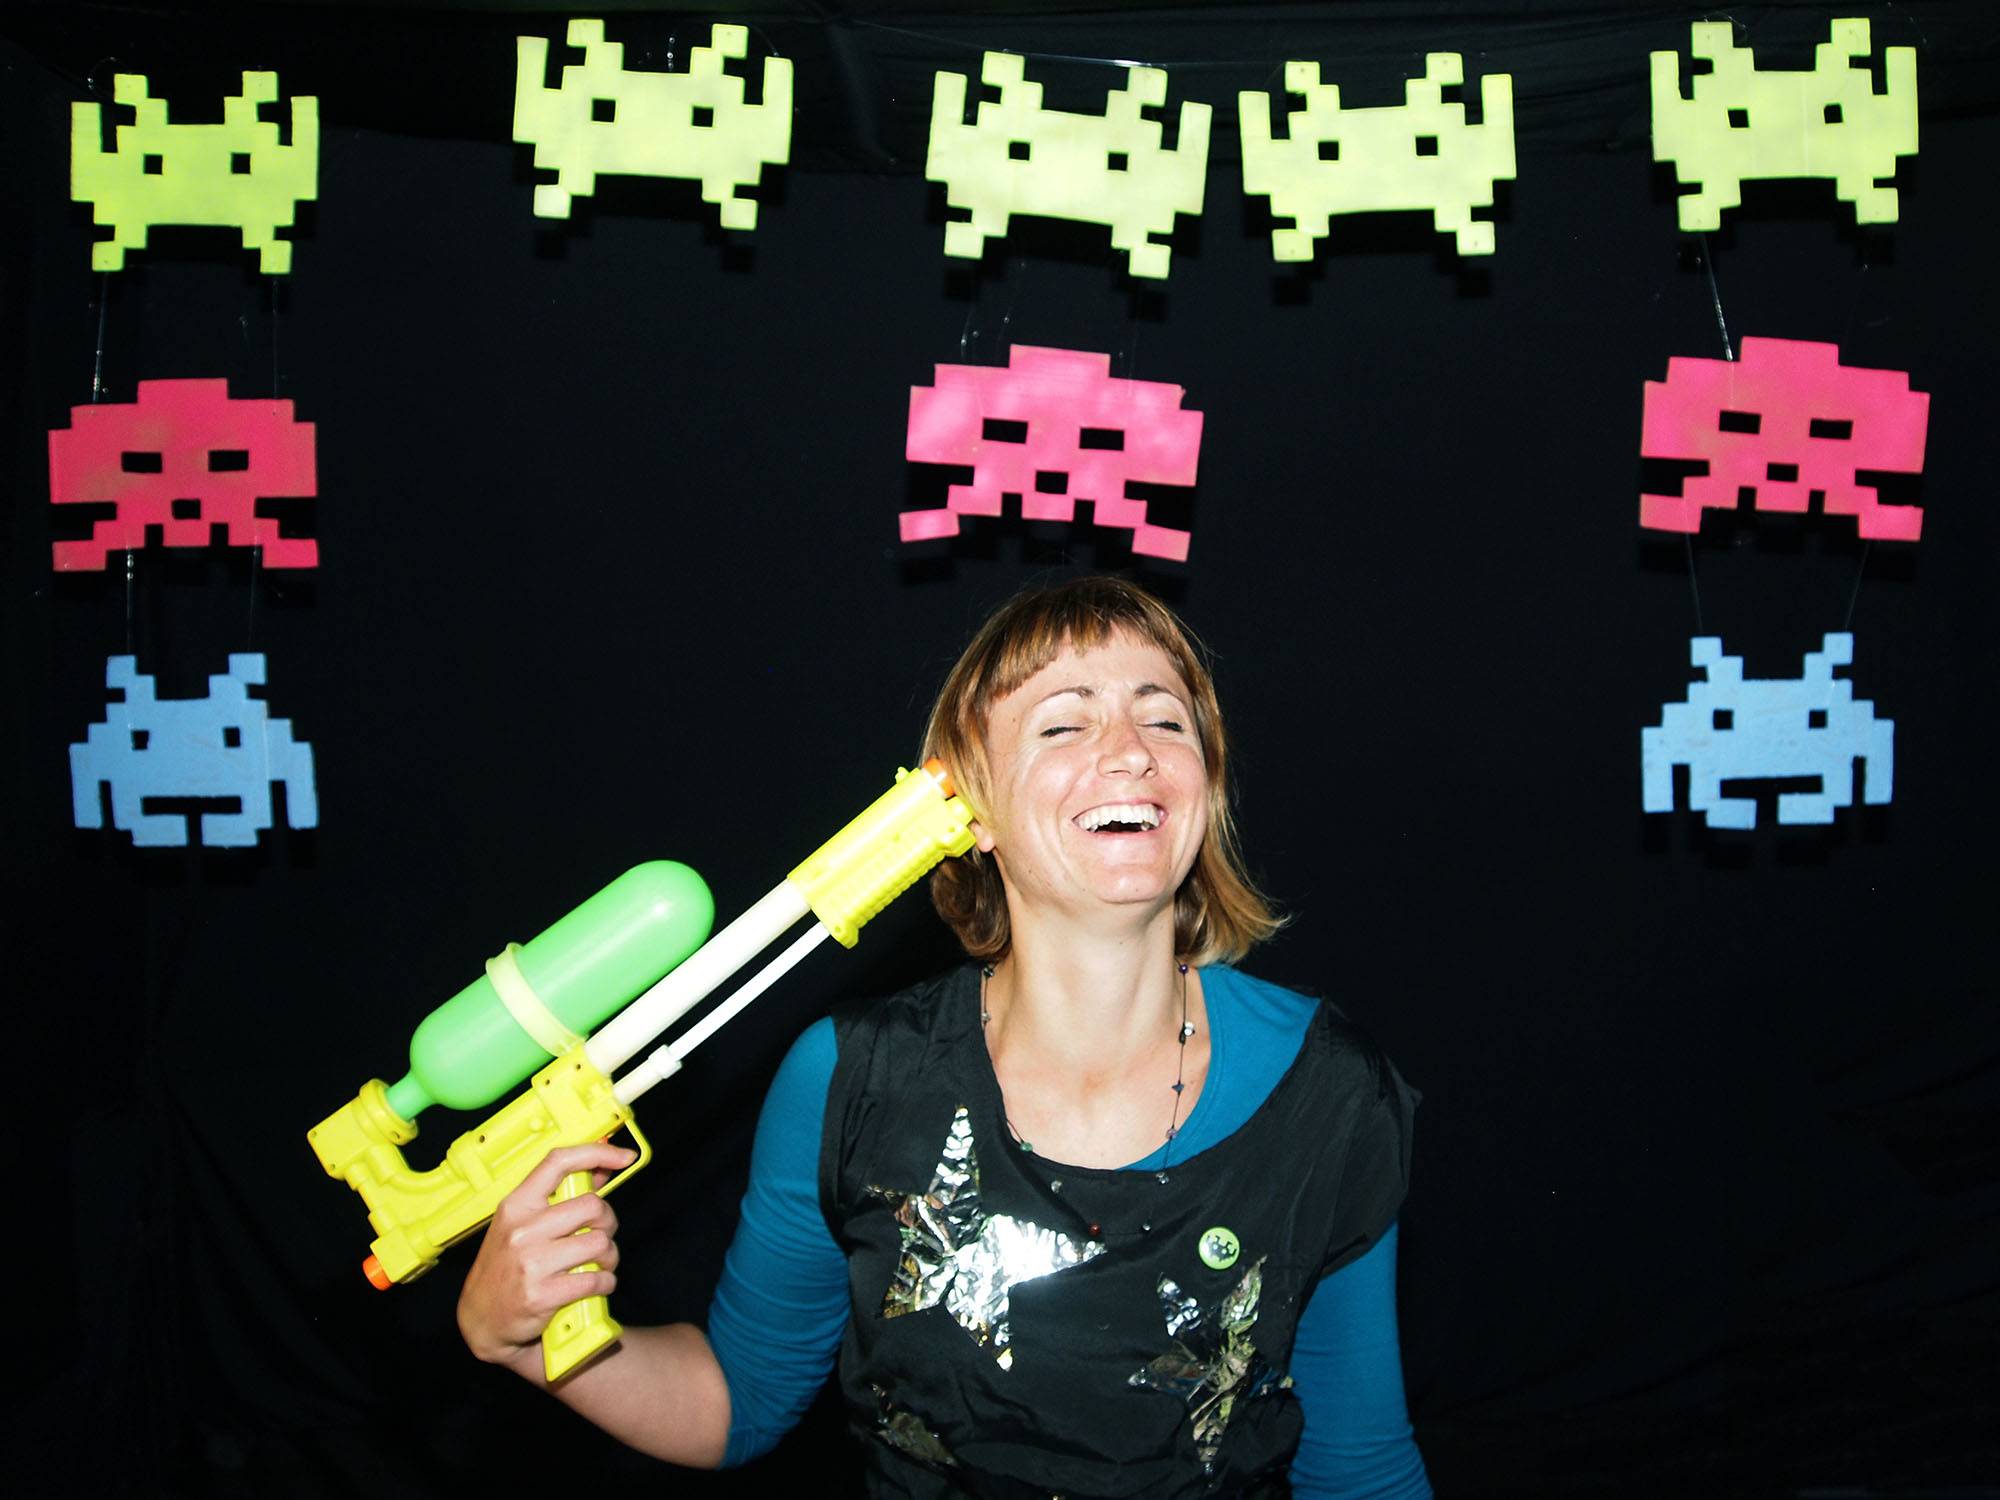 Space Invaders – Photobooth